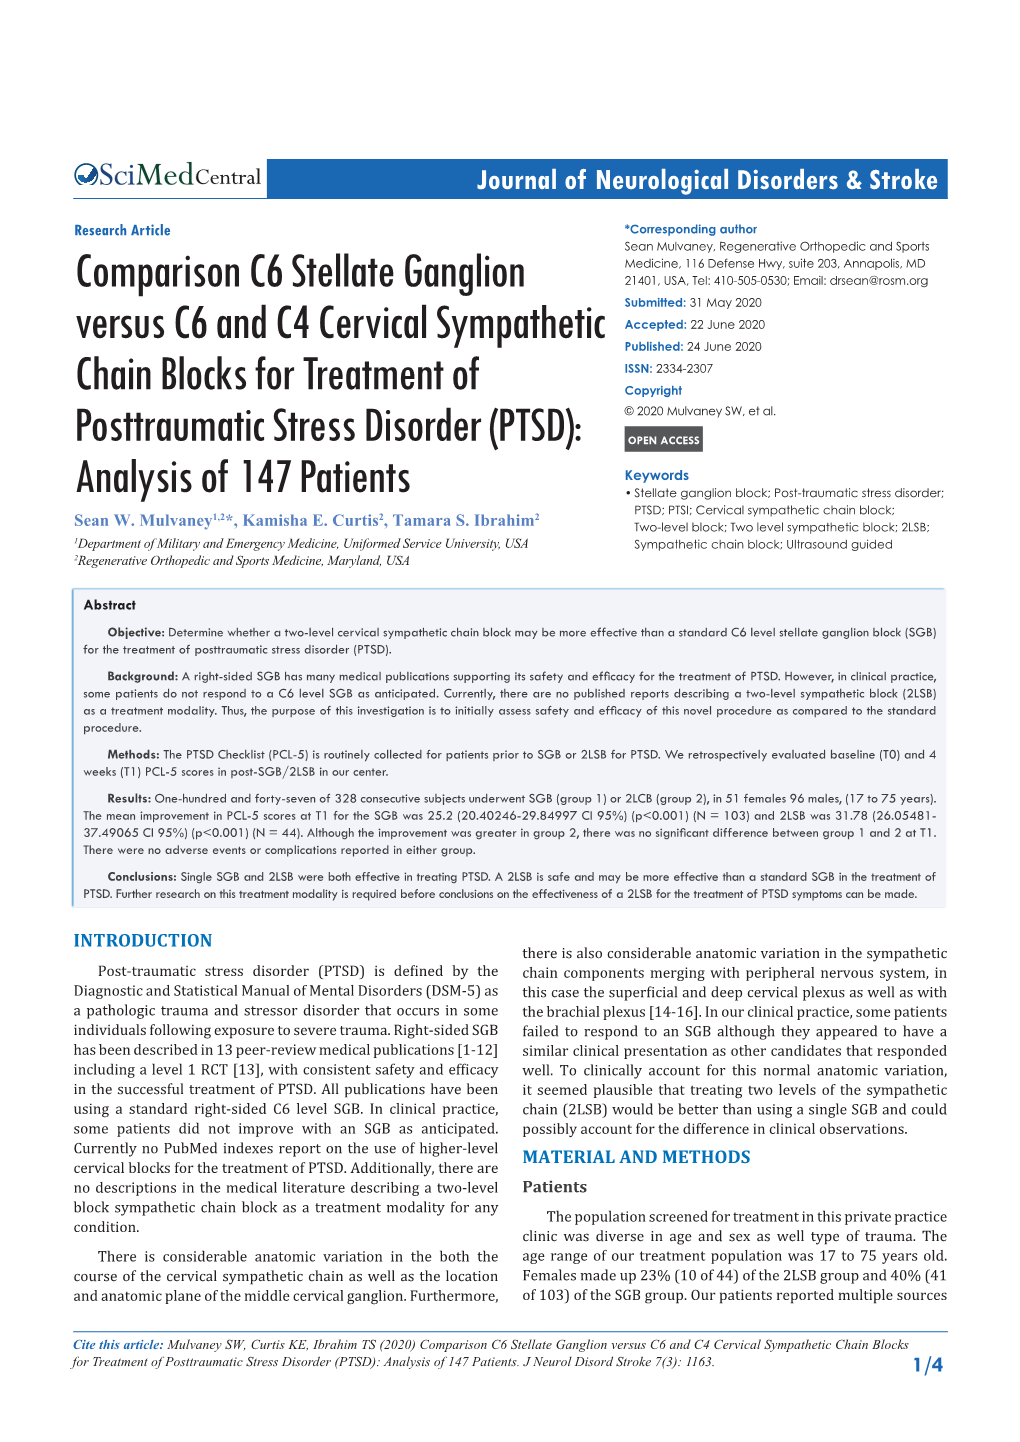 Comparison C6 Stellate Ganglion Versus C6 and C4 Cervical Sympathetic Chain Blocks for Treatment of Posttraumatic Stress Disorder (PTSD): Analysis of 147 Patients